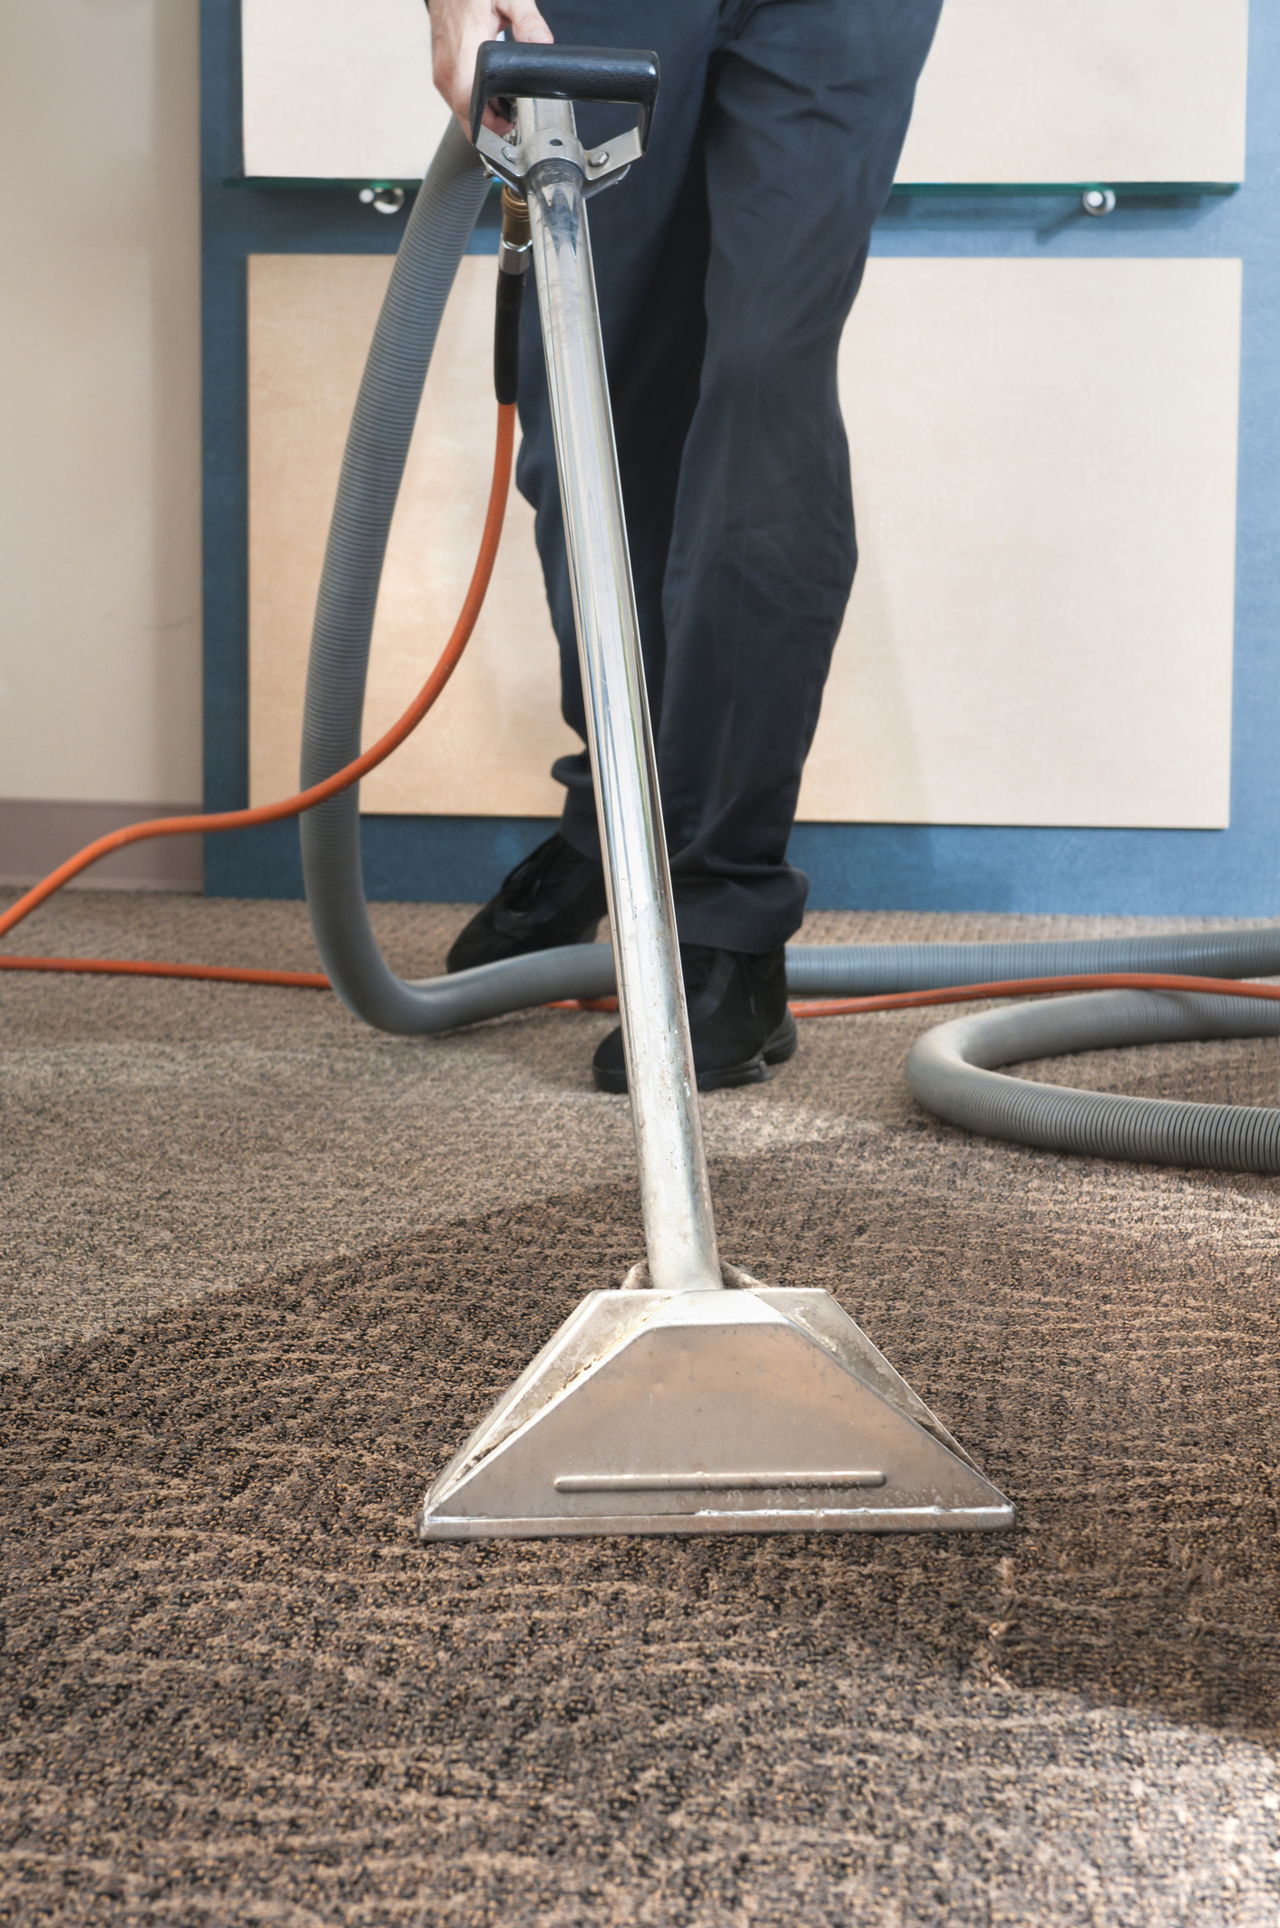 Reviews on Commercial Carpet Cleaning Machines